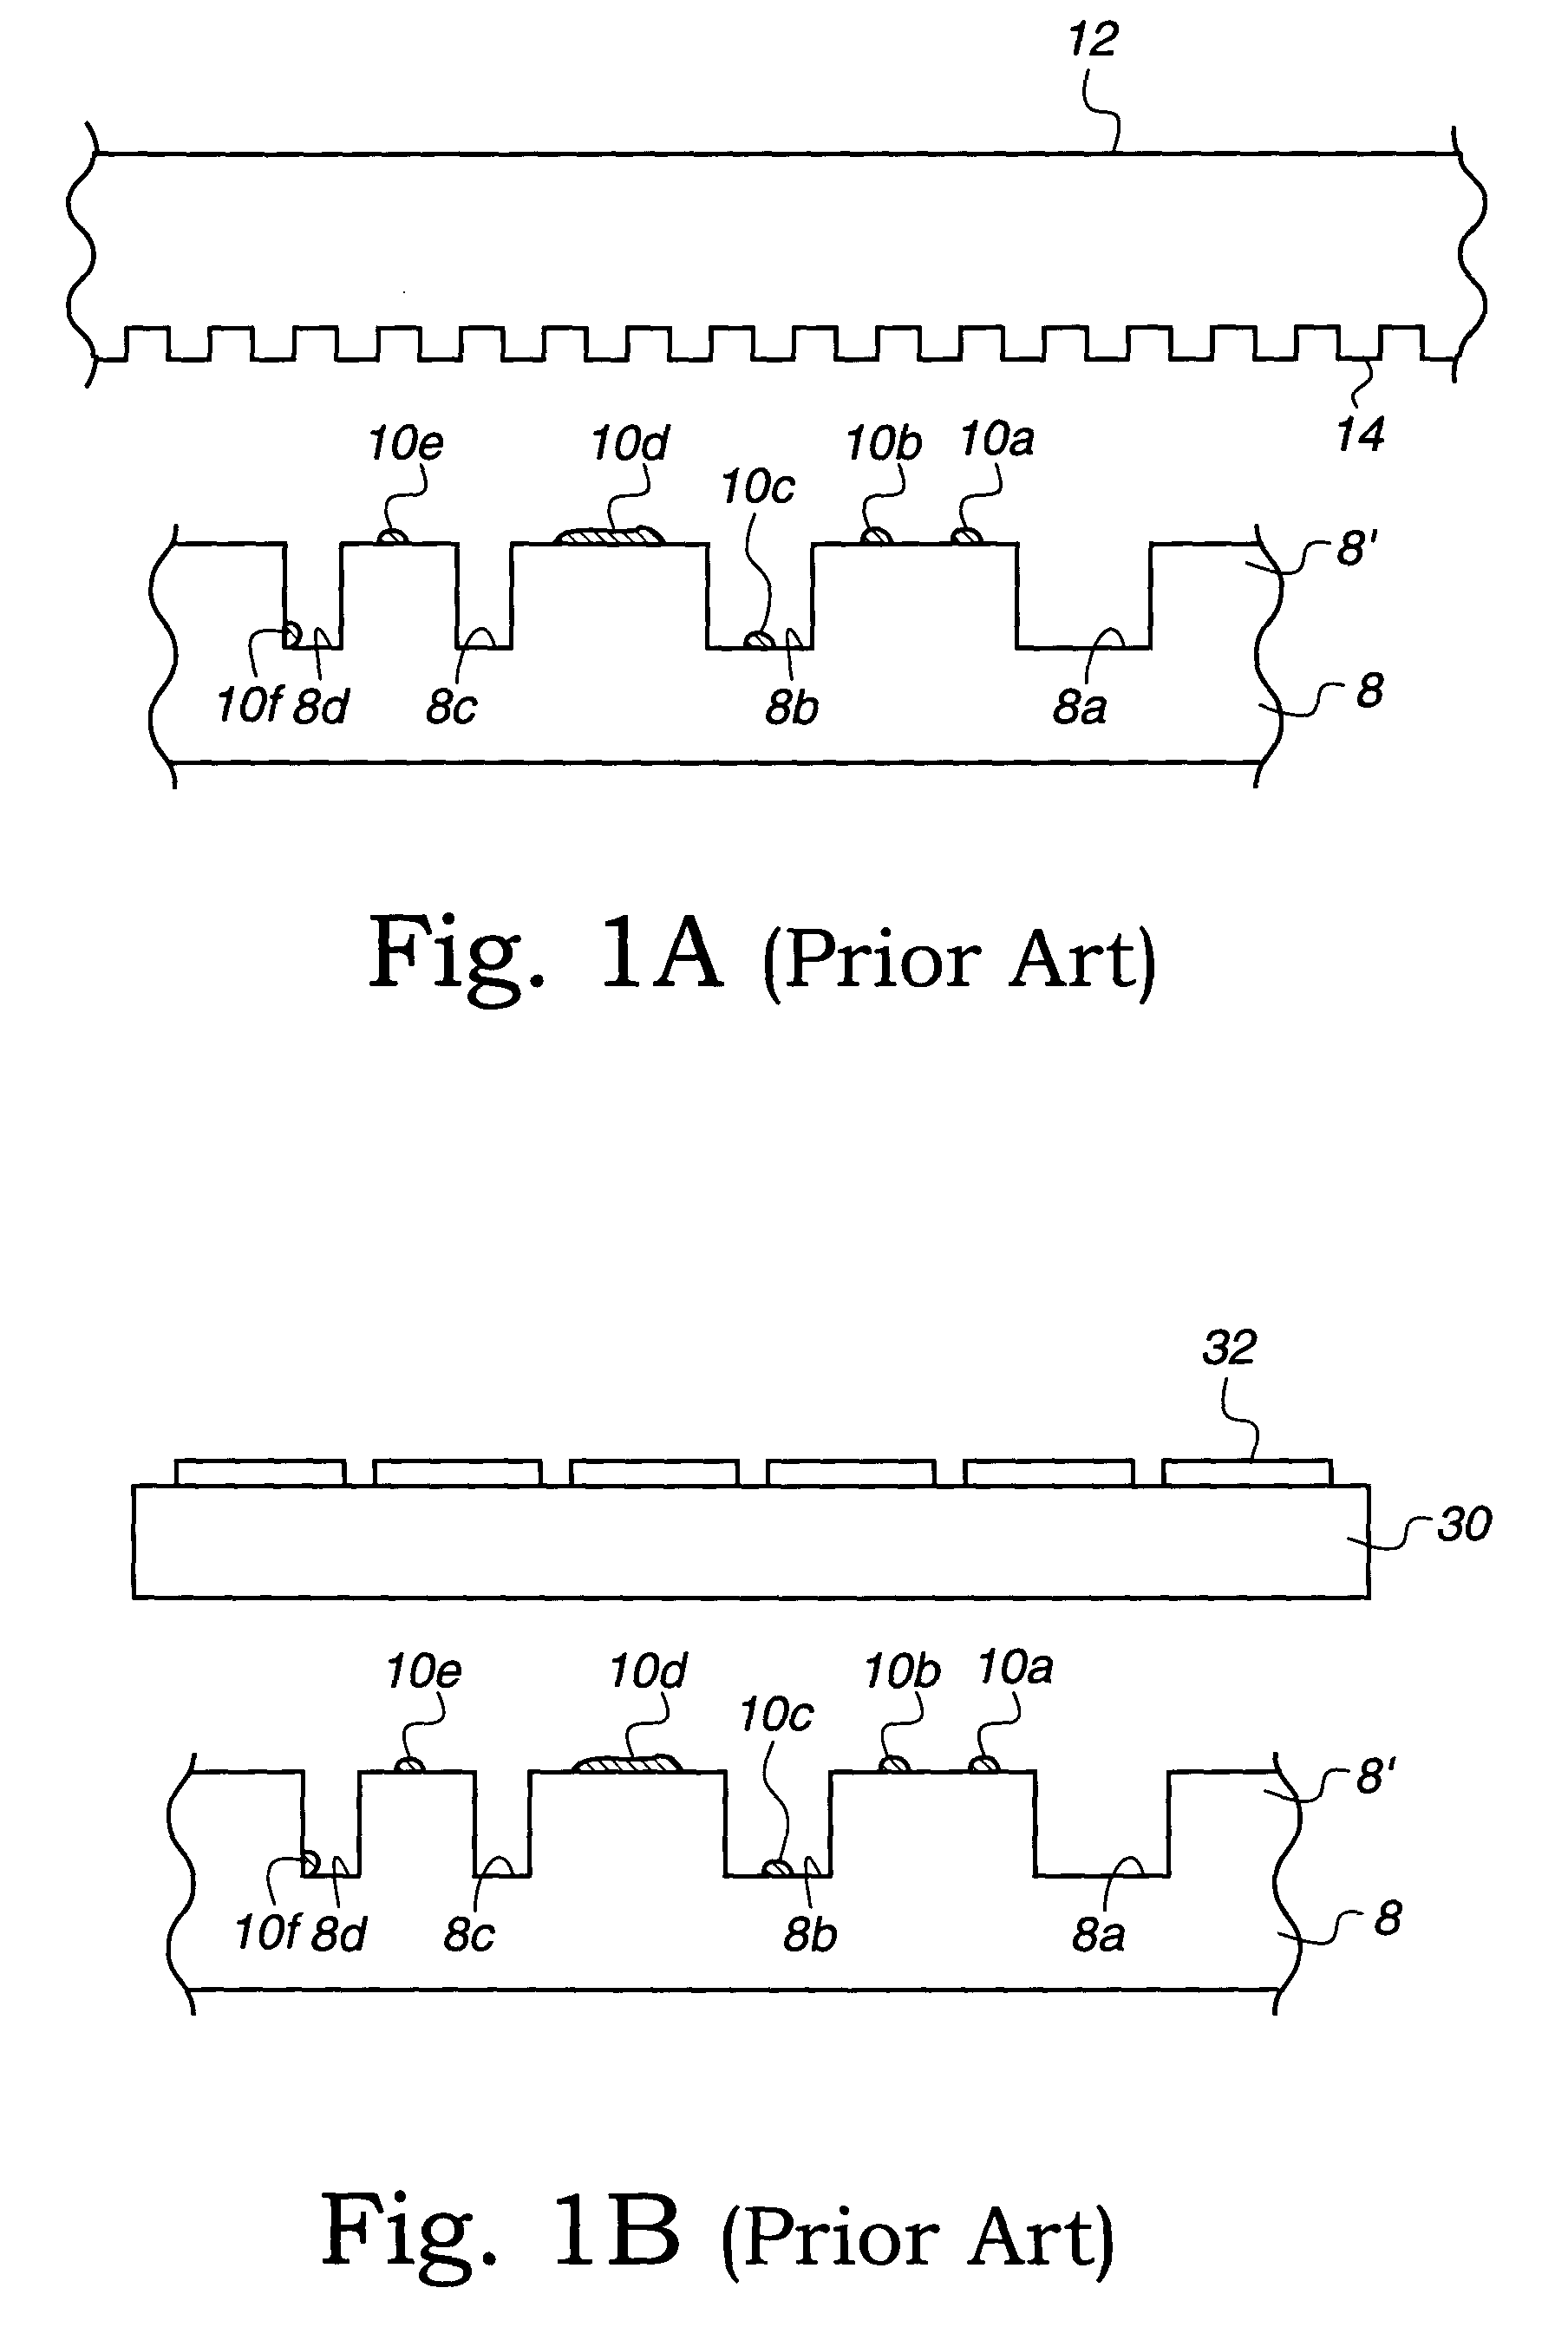 Brush scrubbing-high frequency resonating wafer processing system and methods for making and implementing the same